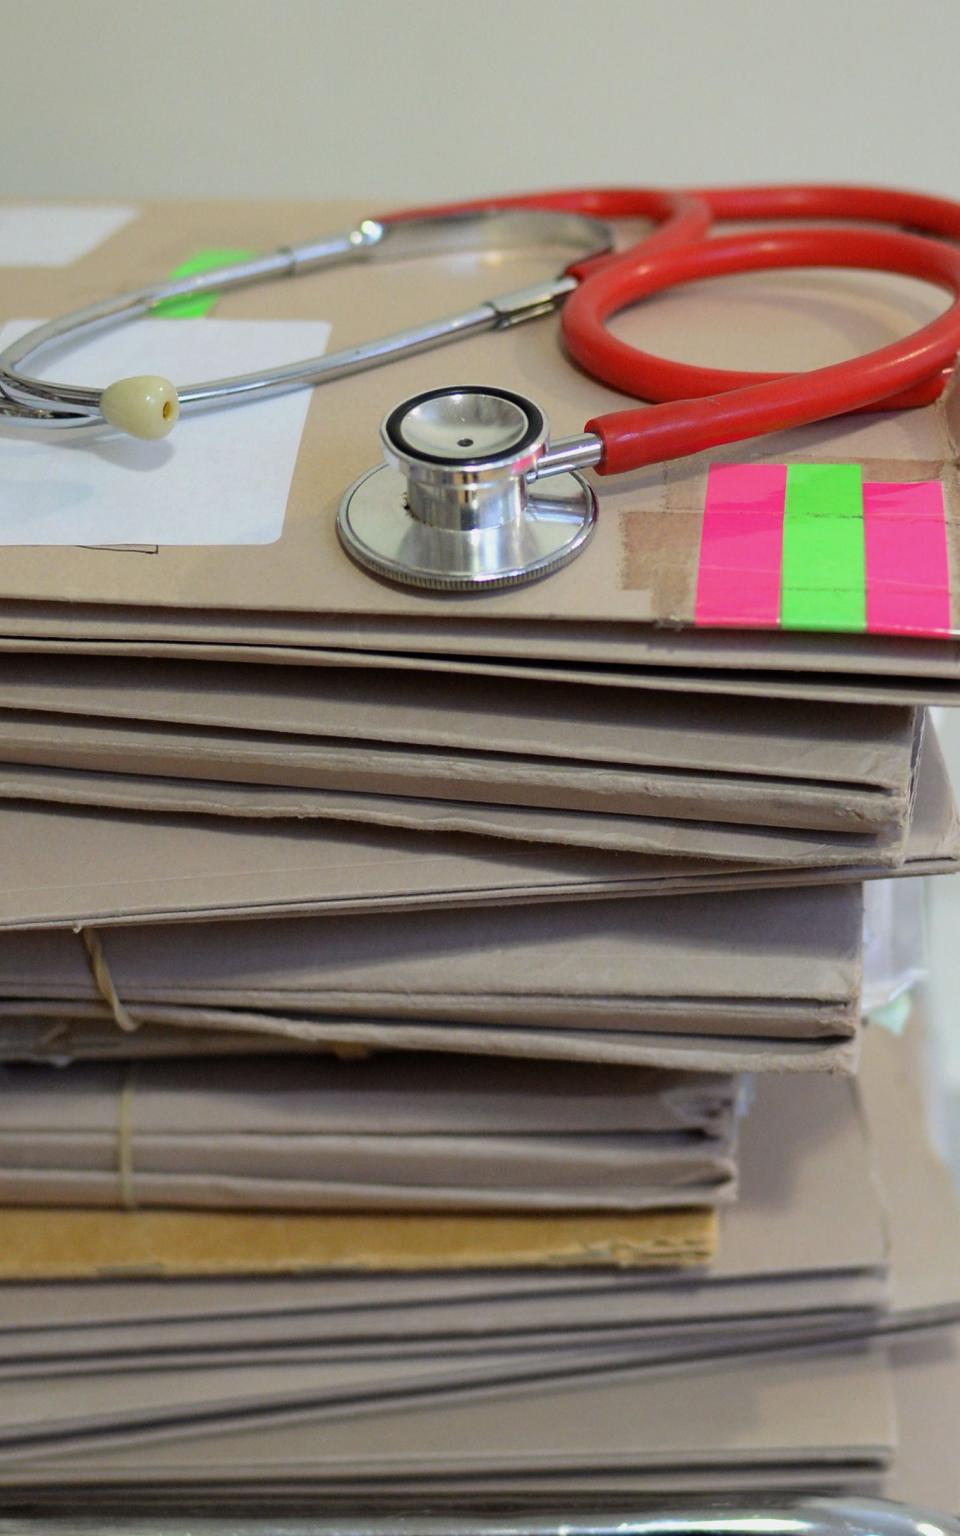 A stack of patient files and a stethoscope - Credit: Anthony Devlin/PA Wire